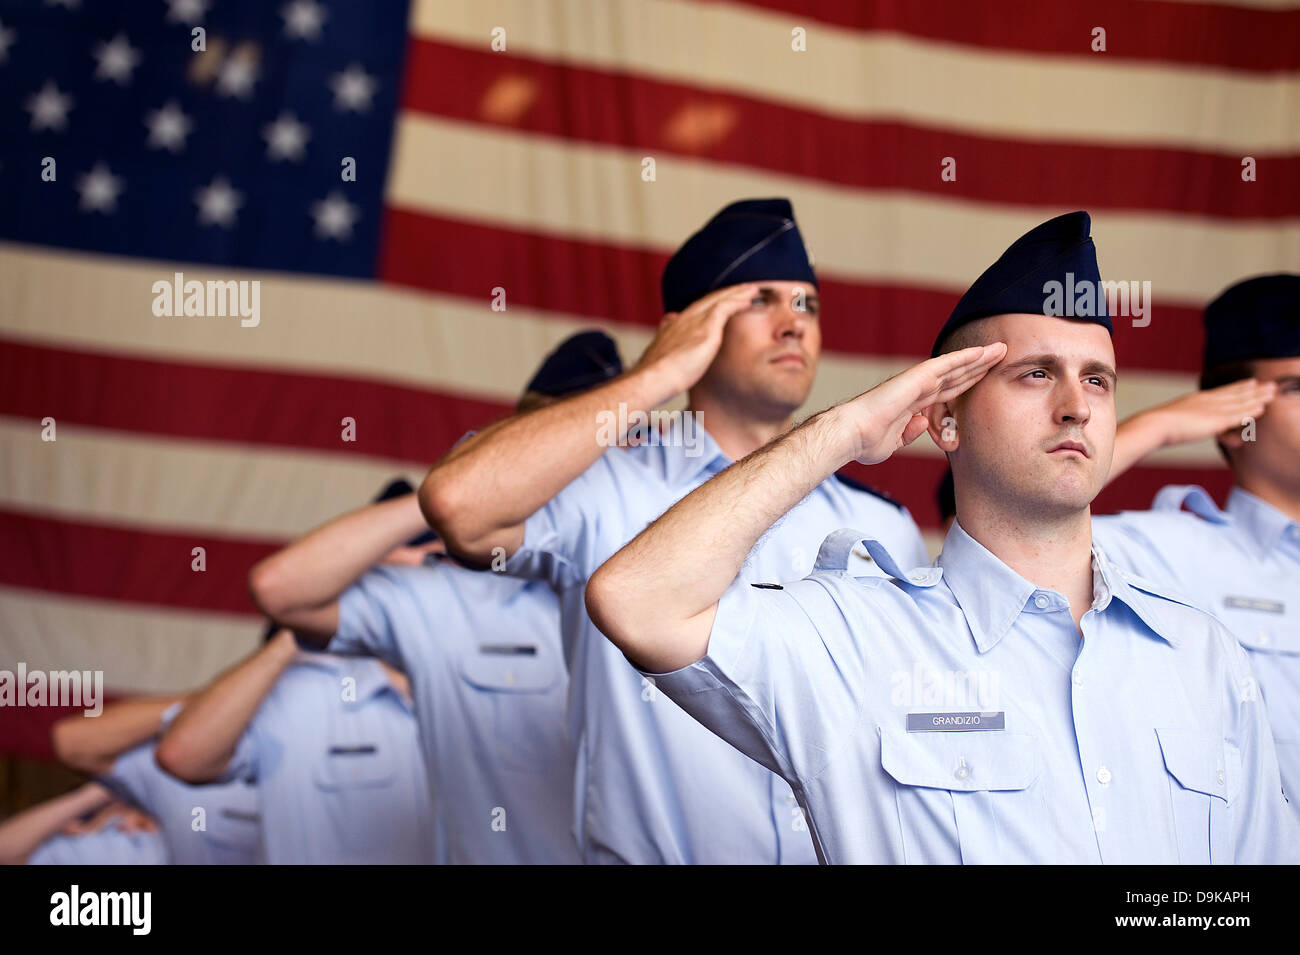 US Air Force Airmen salute to the American flag during the singing of the Star Spangled Banner a change of command ceremony May 13, 2013 at Kadena Air Base, Japan. Stock Photo